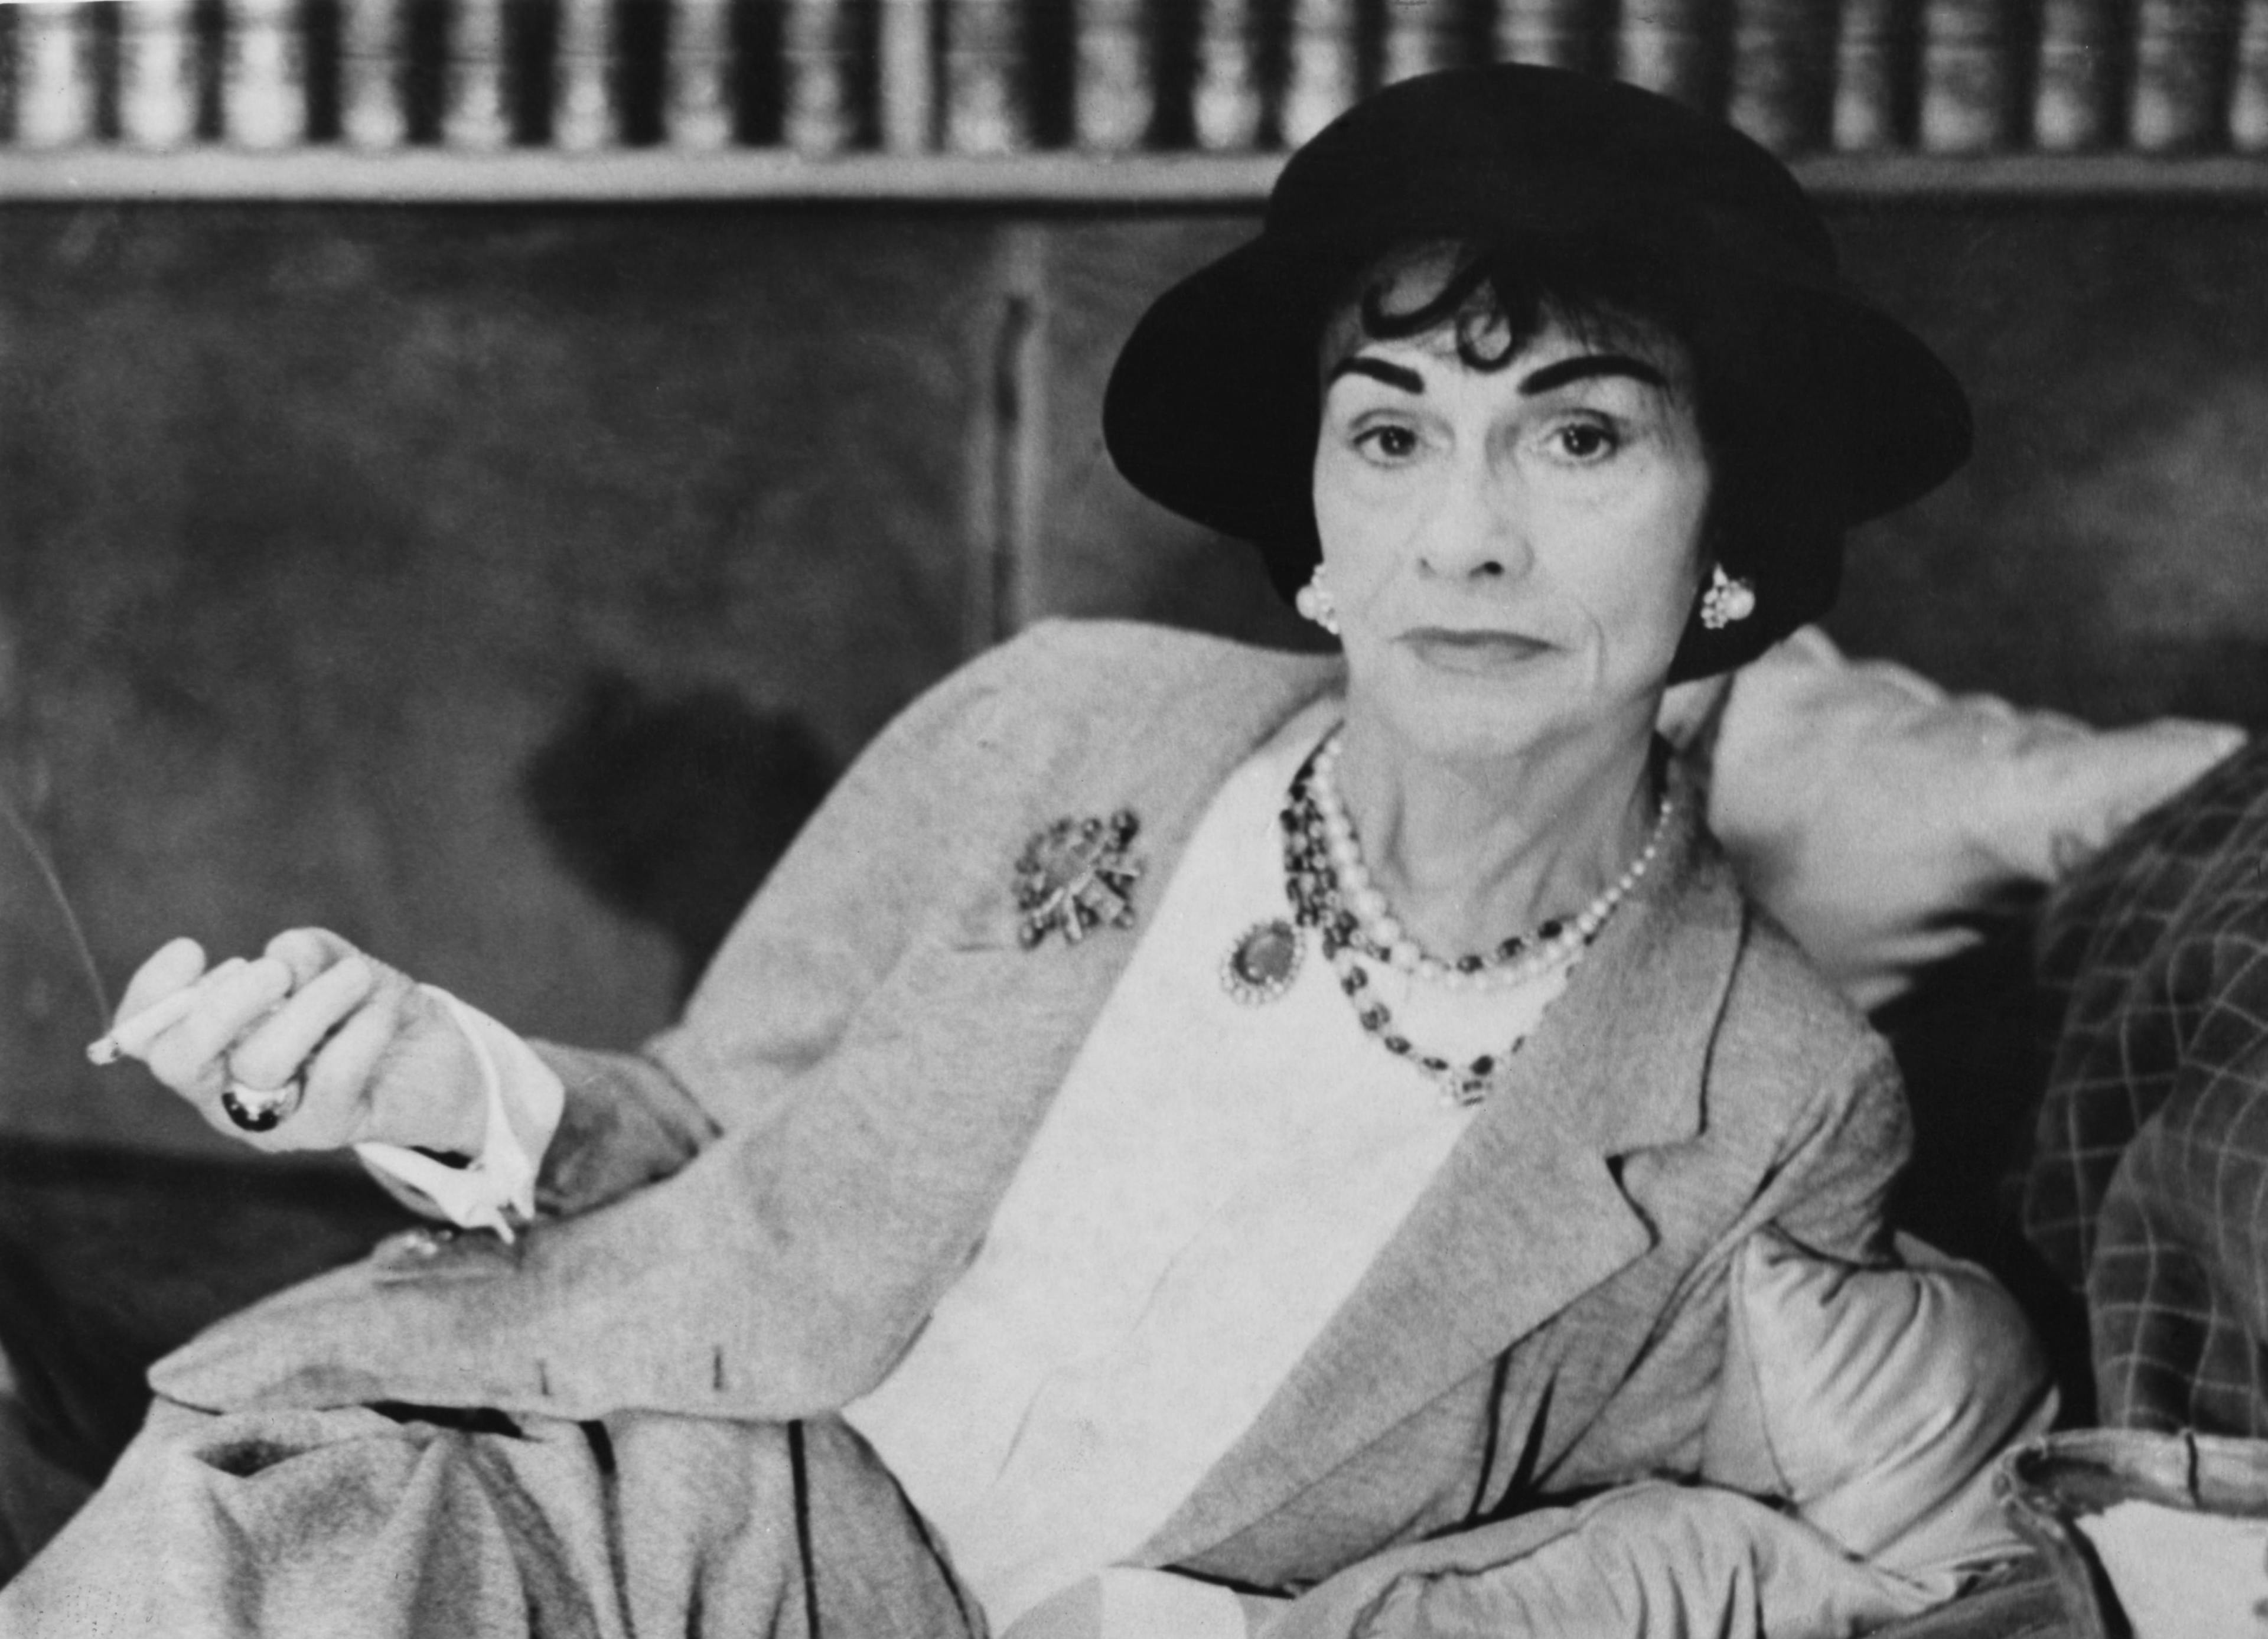 The history behind Coco Chanel's name; Gabrielle Bonheur Chanel.